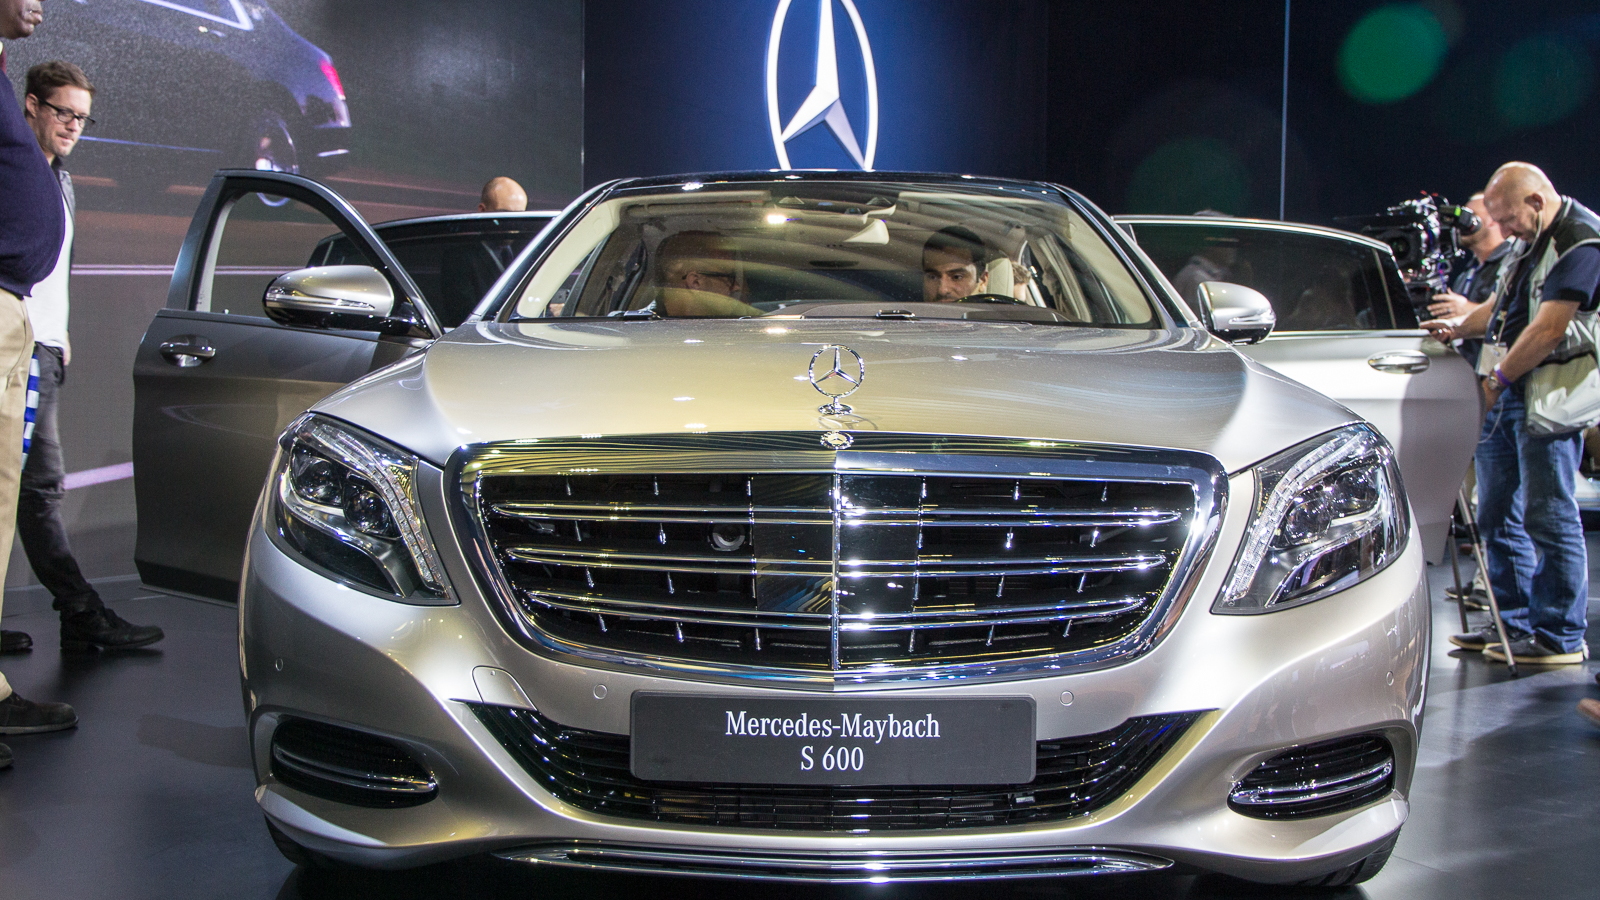 2016 Mercedes-Maybach S600, 2014 Los Angeles Auto Show